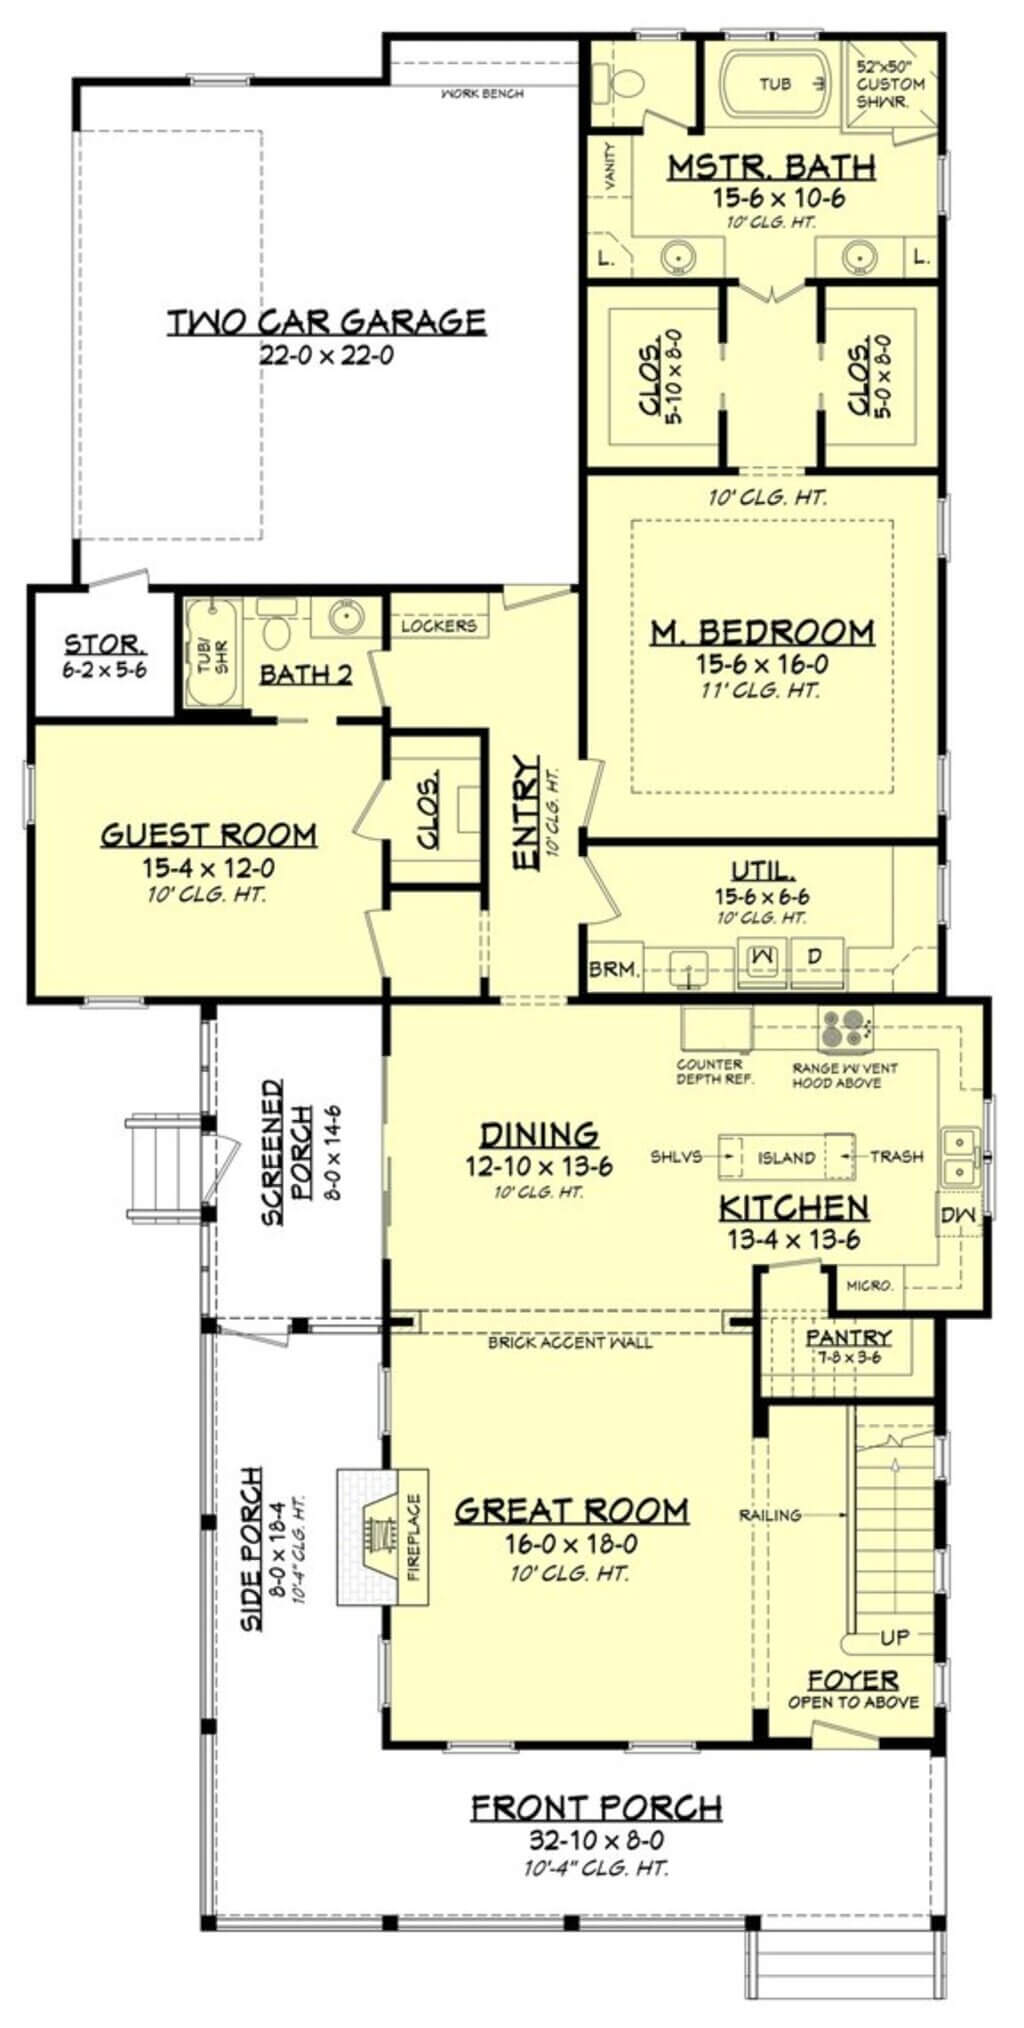 Linearly Spacious house plans